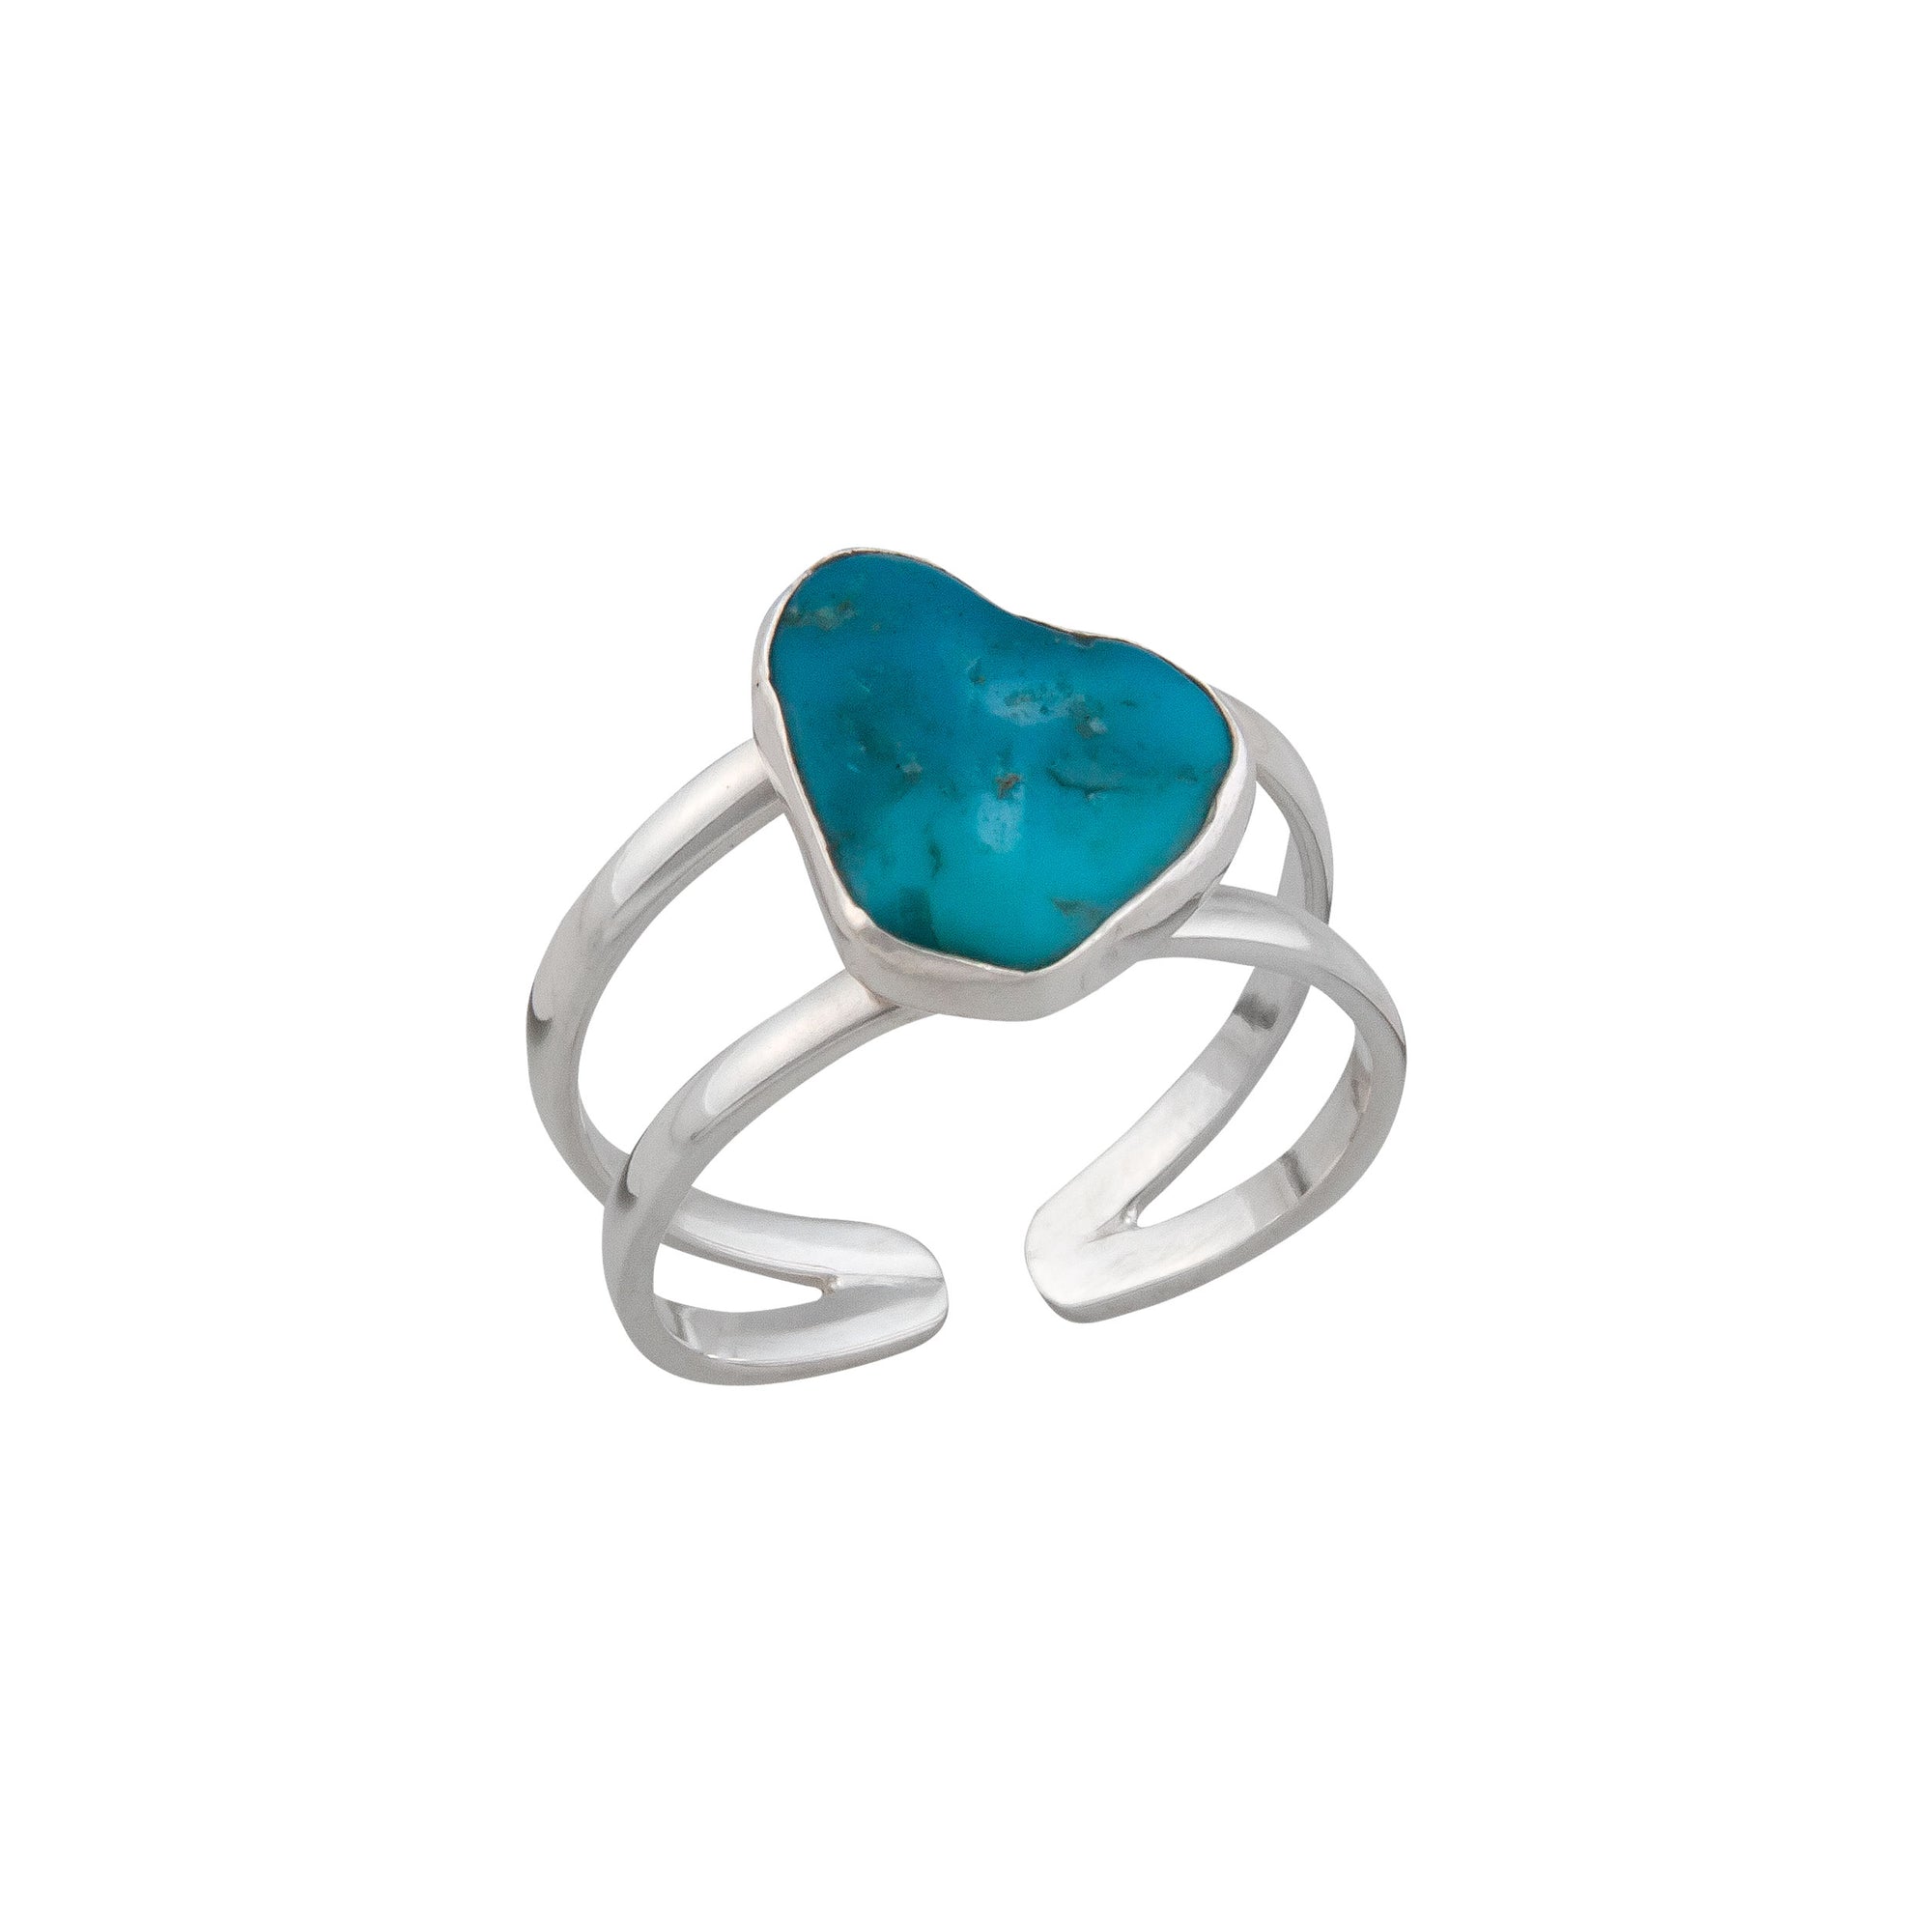 Sterling Silver Sleeping Beauty Turquoise Cuff Ring | Charles Albert Jewelry